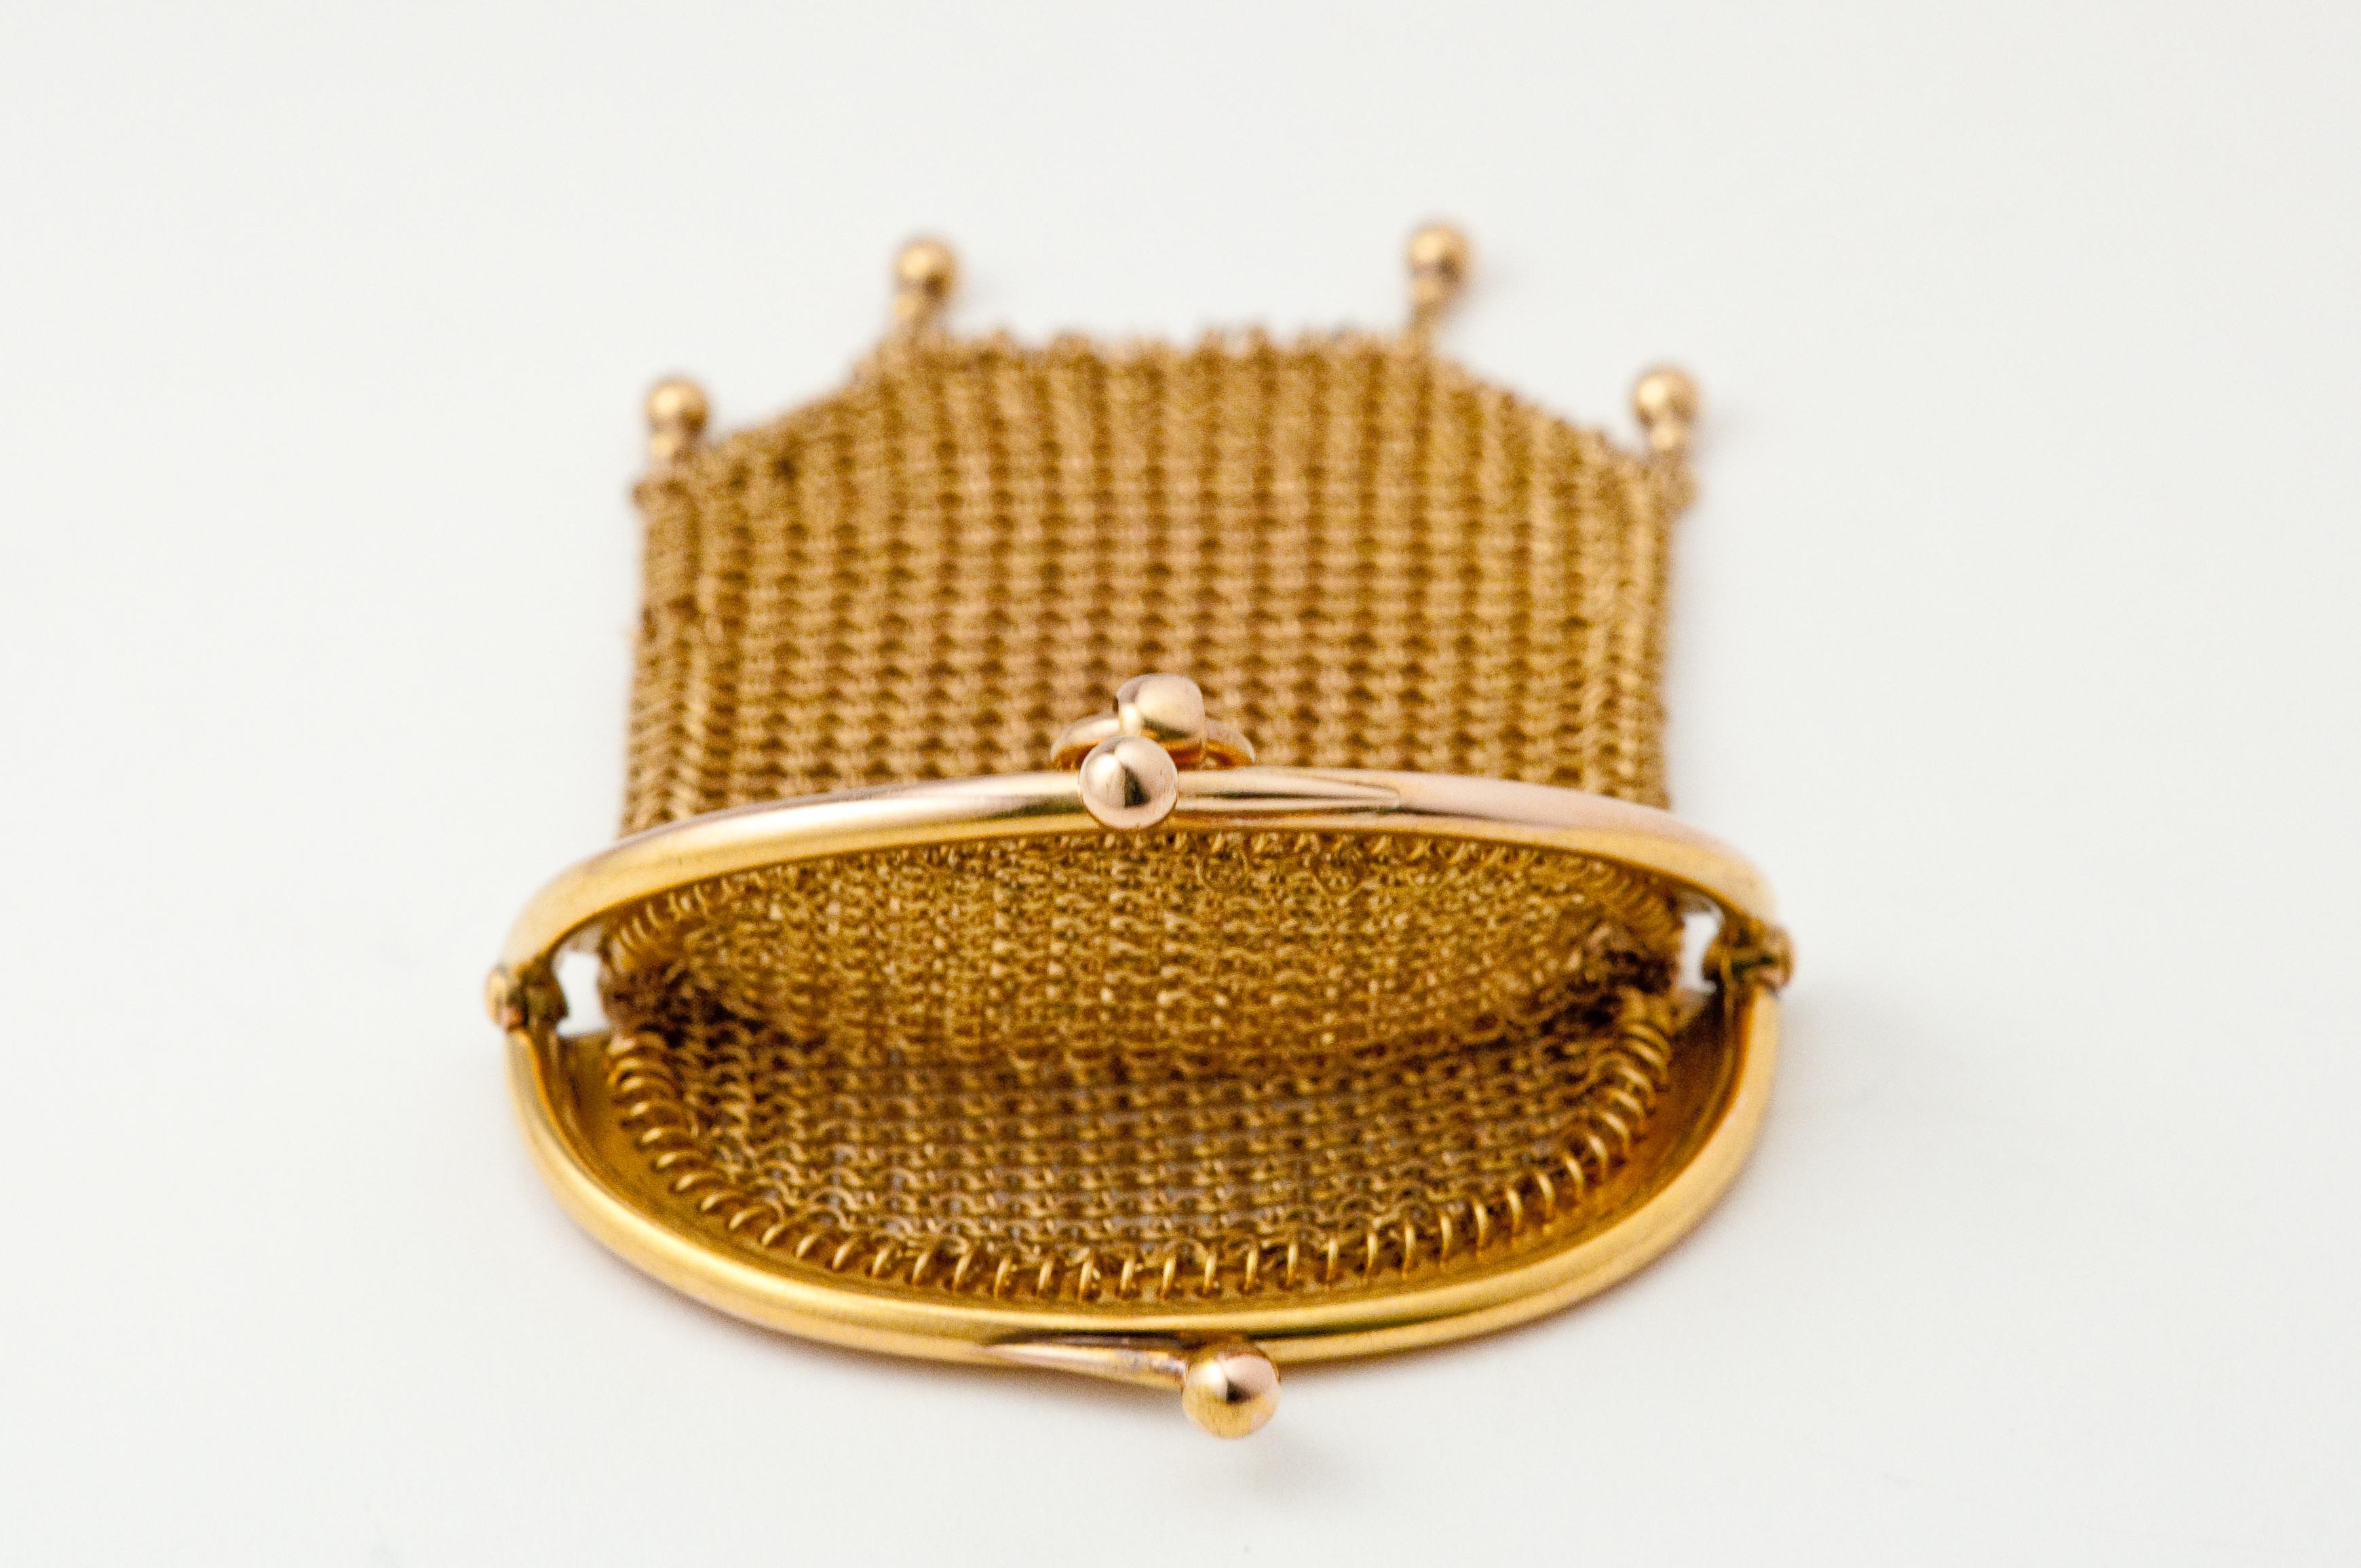 Pretty Gold Minaudiere ,18 Carat From Another Era .
The weaving of the perfect state gives flexibility to this so delicious object .